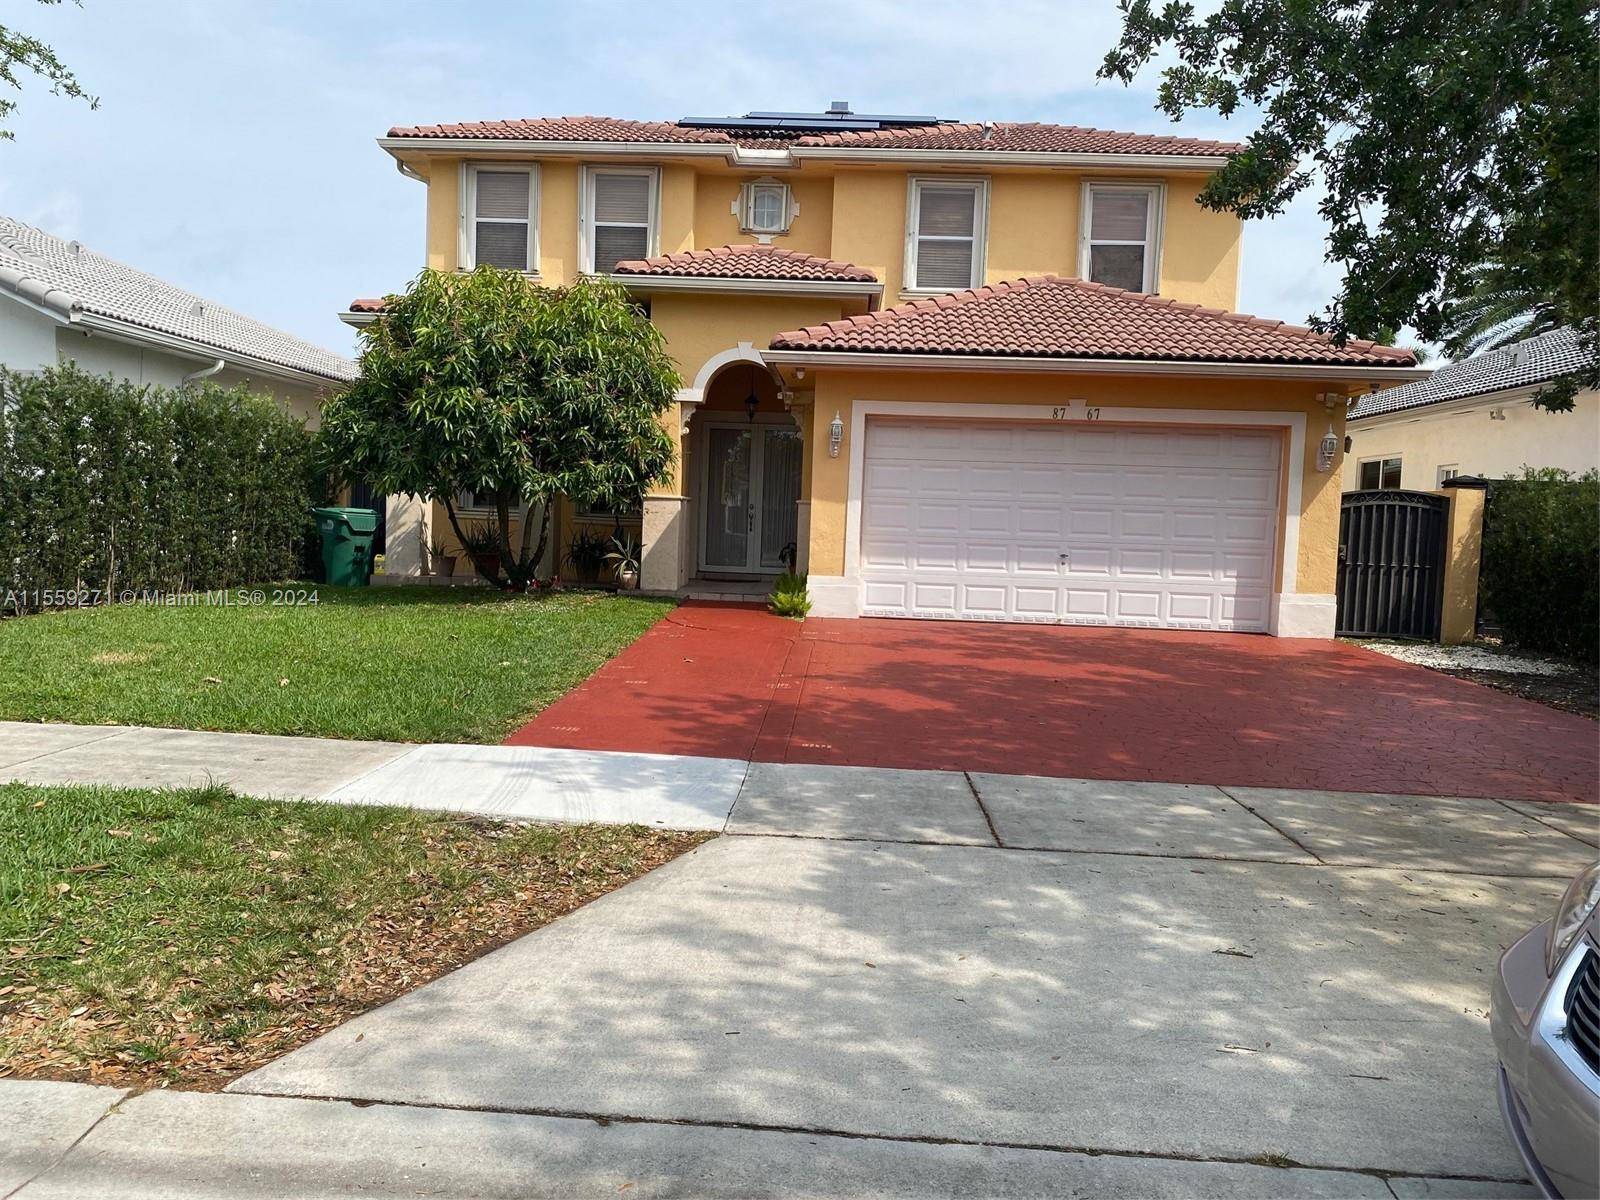 Excellent home in the desired Miami Lakes Neighborhood.